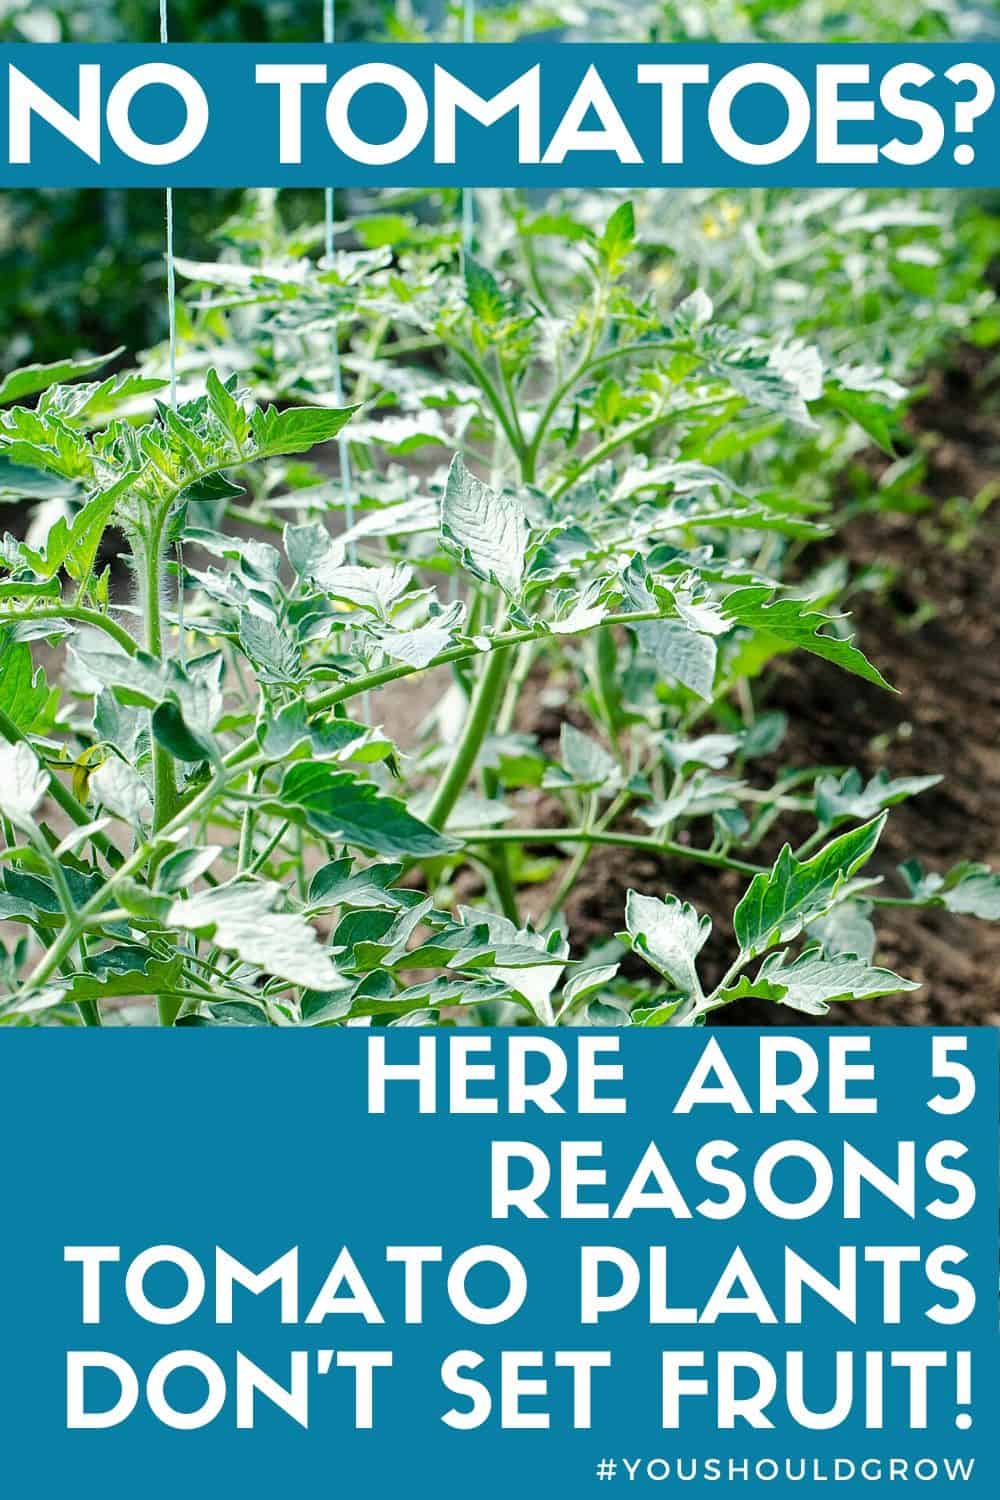 Isn't it frustrating when your tomato plant flowers but there's no fruit? Here are 5 reasons why your tomato plant has no tomatoes and what you can do about it.